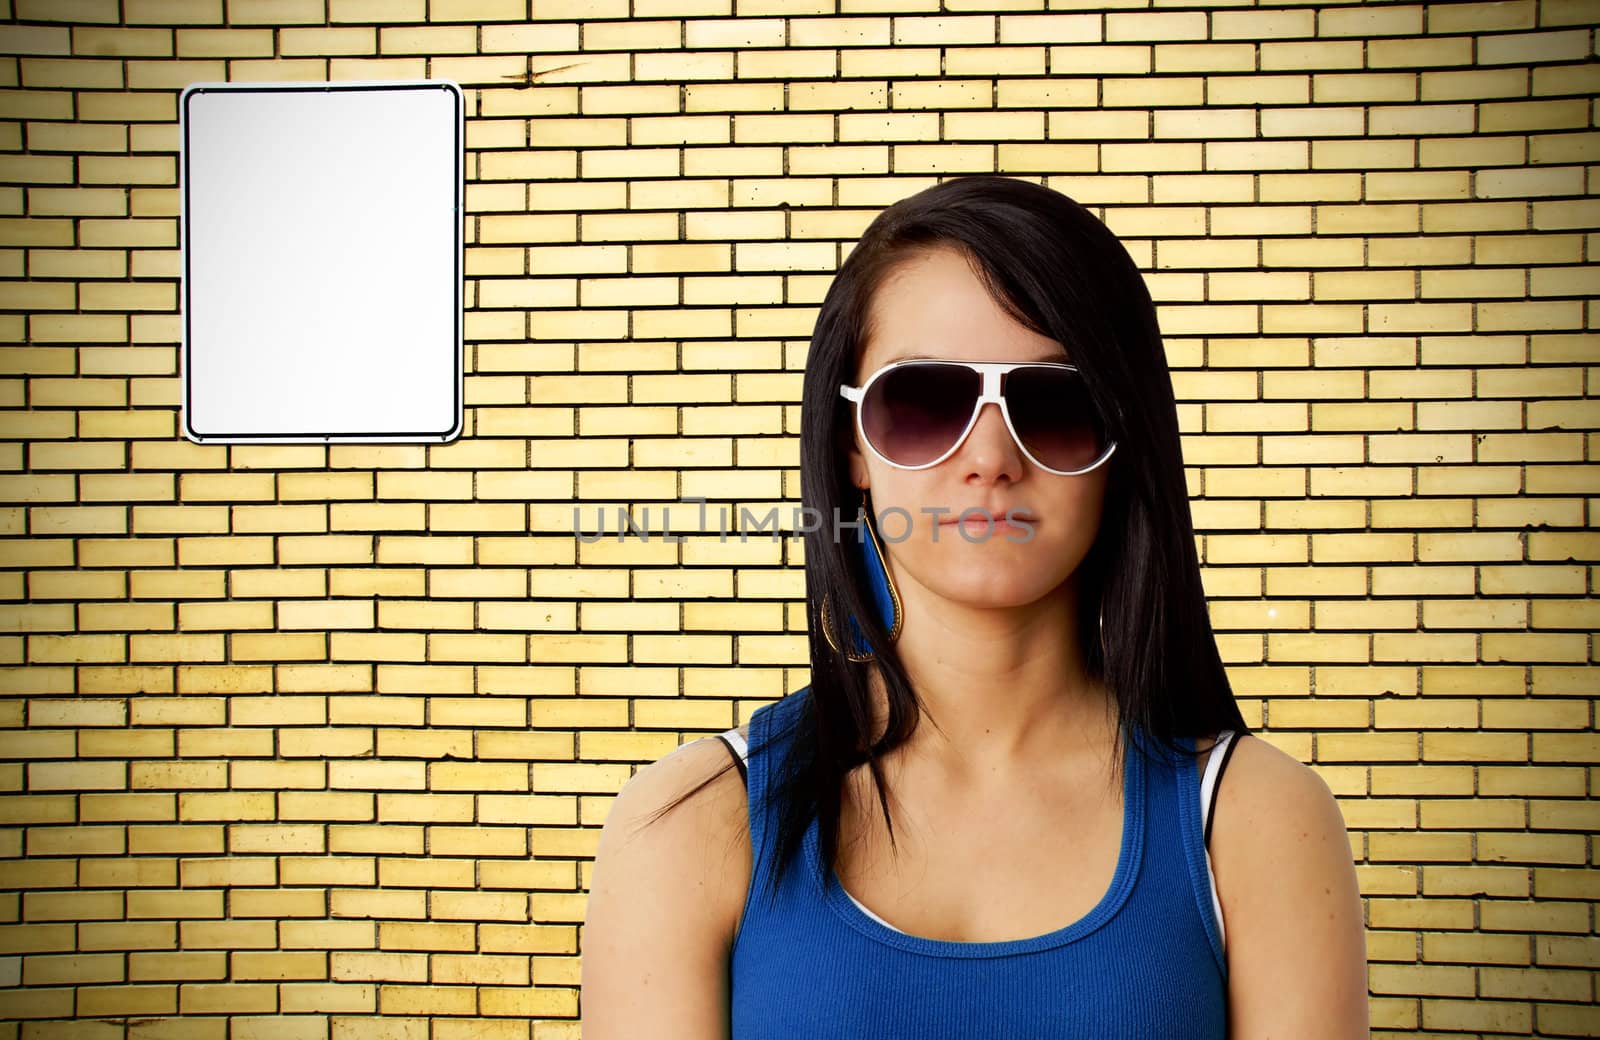 Tough looking young woman with sunglasses in front of yellow brick wall background with blank white metal sign ready for your text.